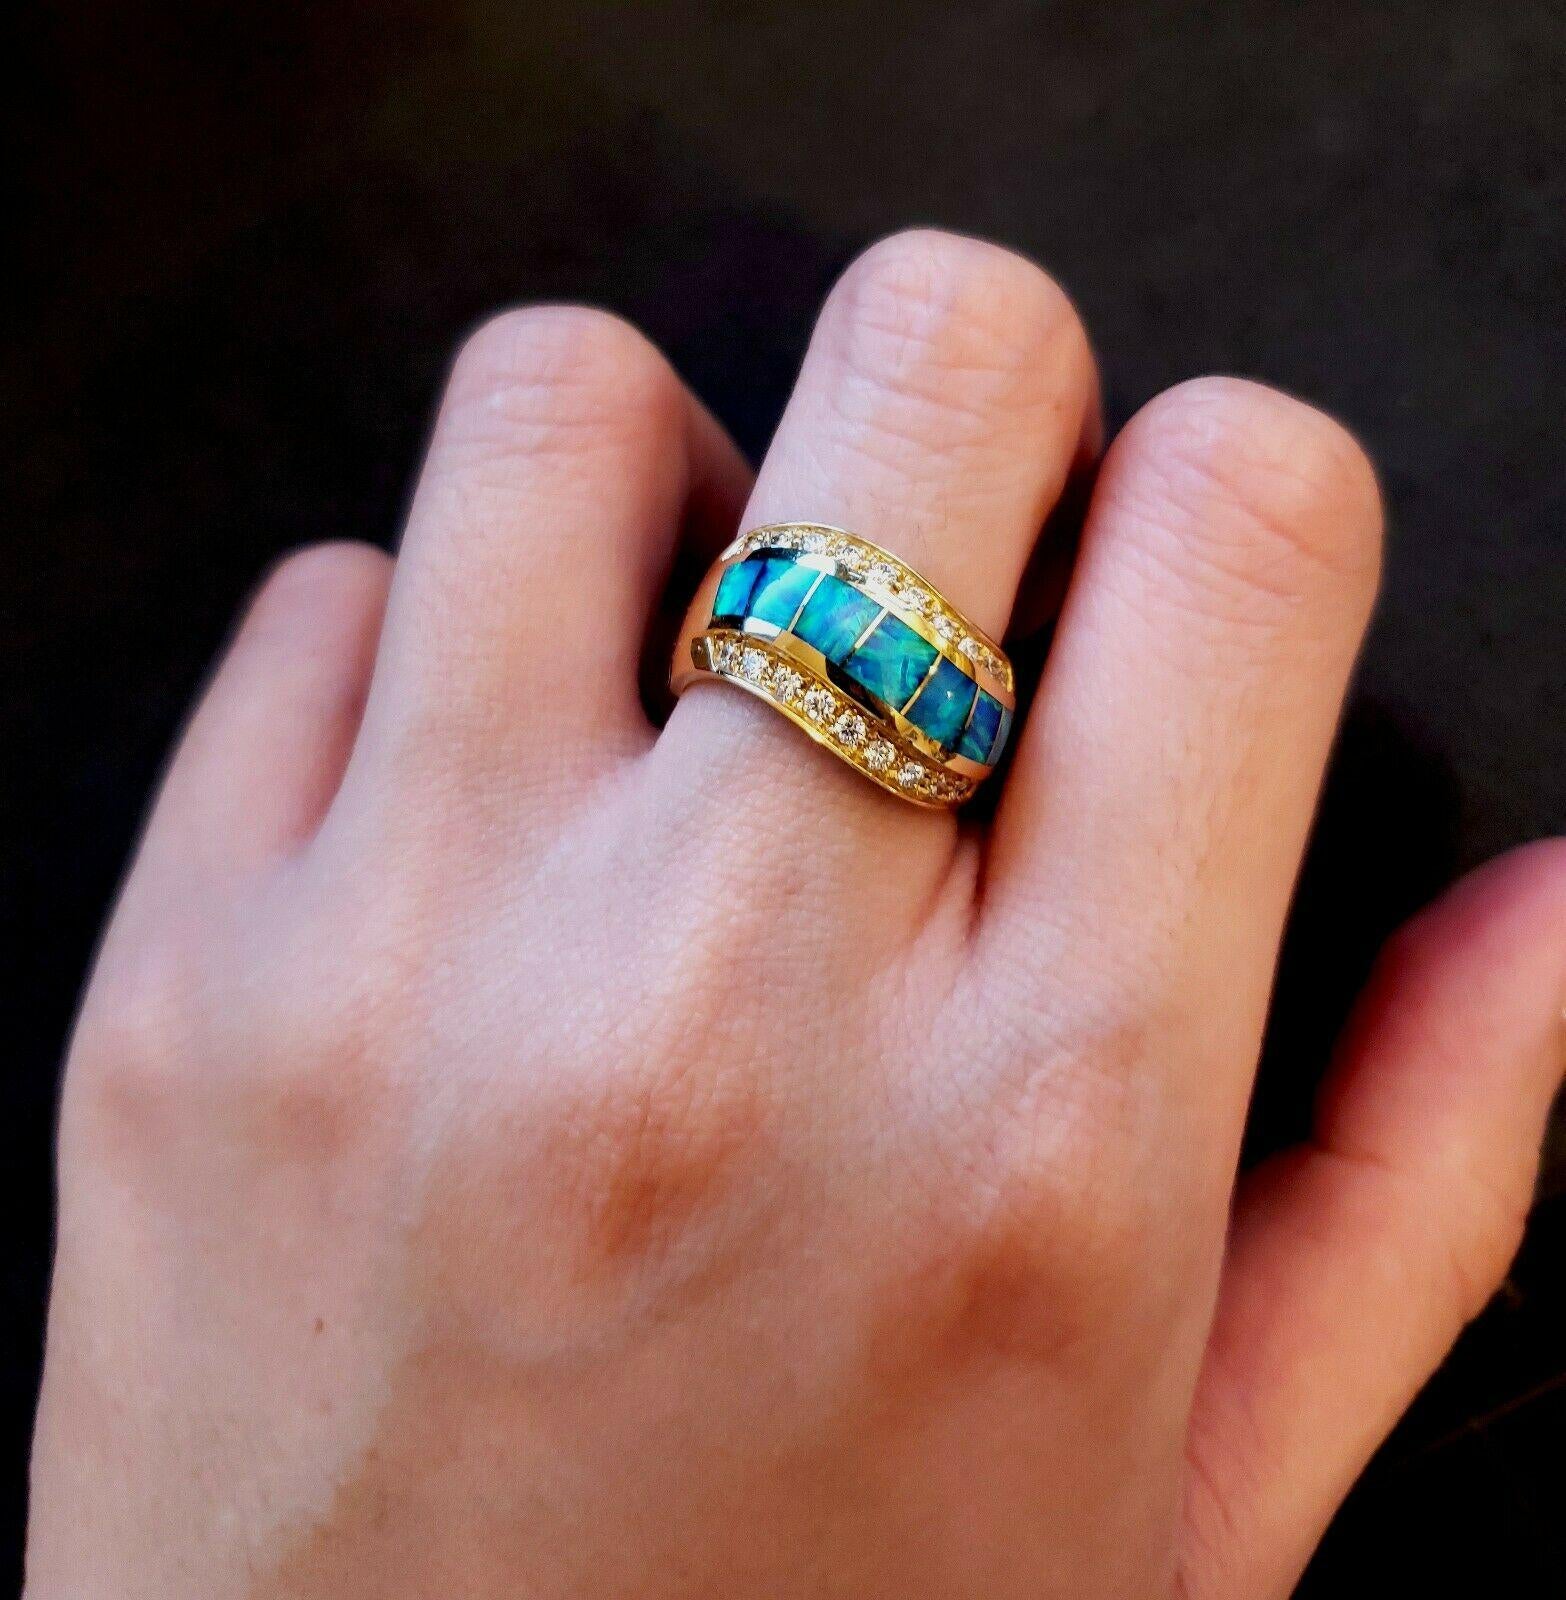 Contemporary 14 Karat Yellow Gold Inlaid Dublet Opal Ring It Consists of 7 Square Opals Lined